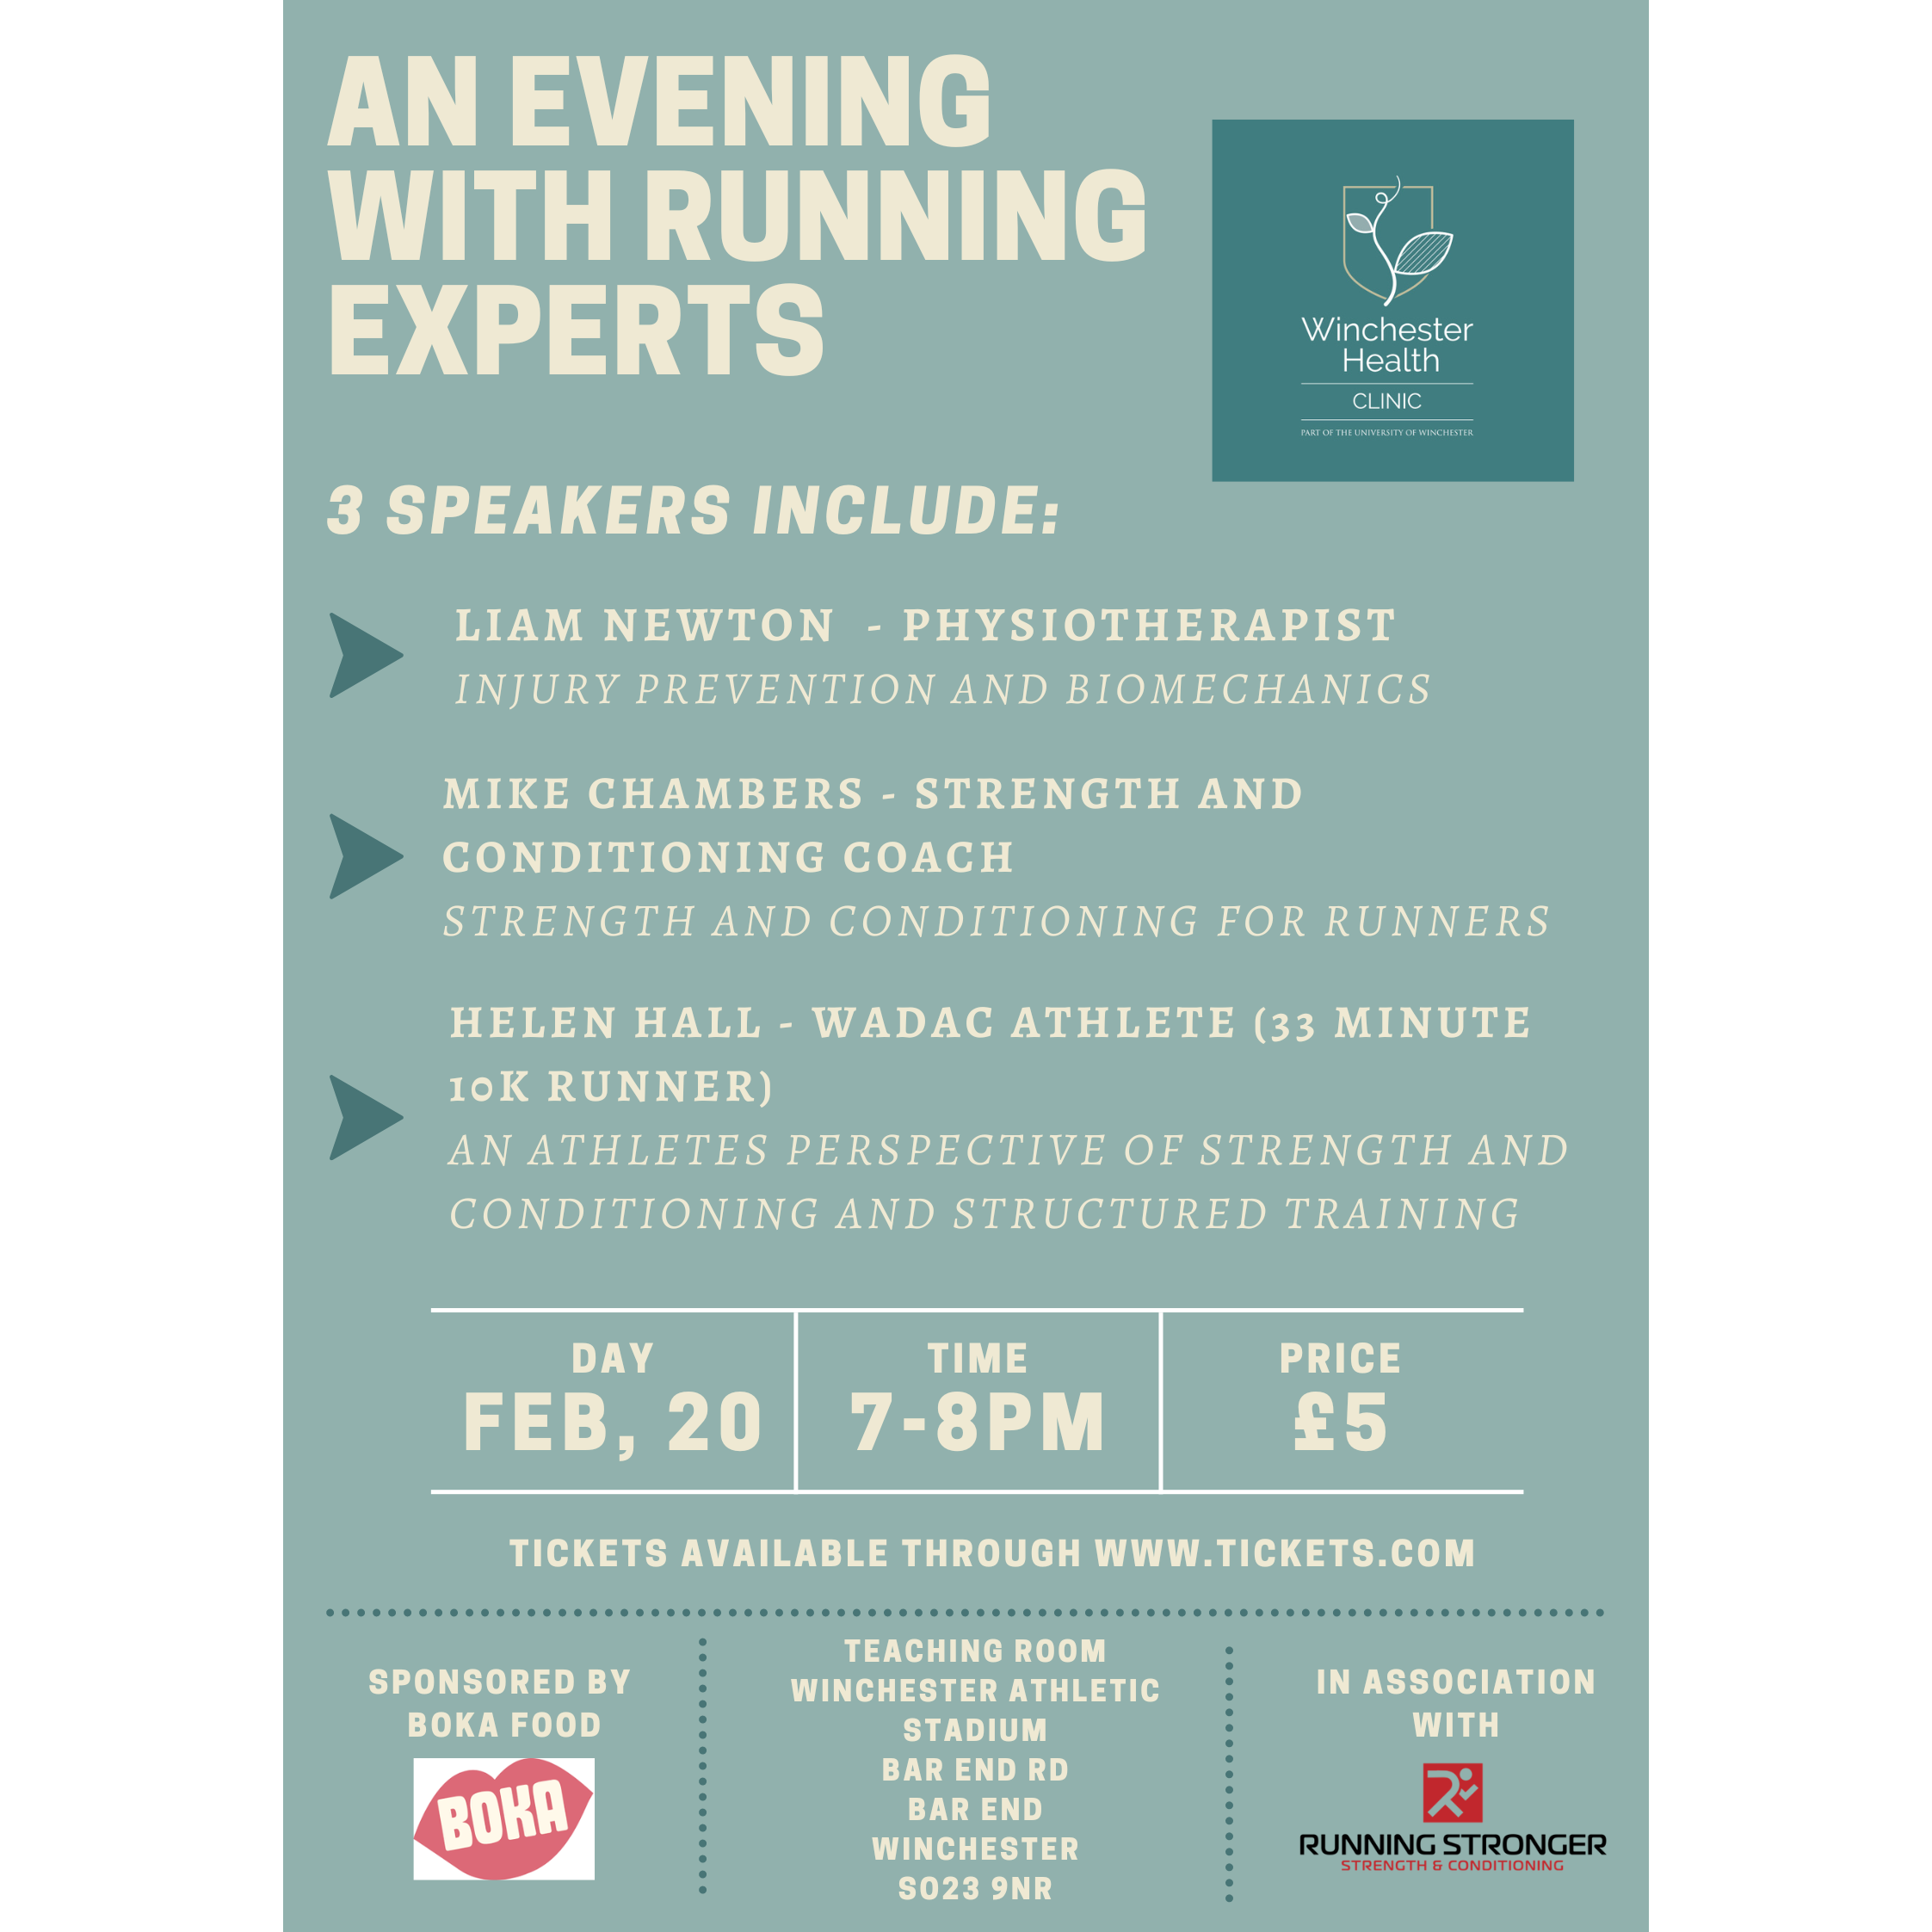 An Evening with Running Experts